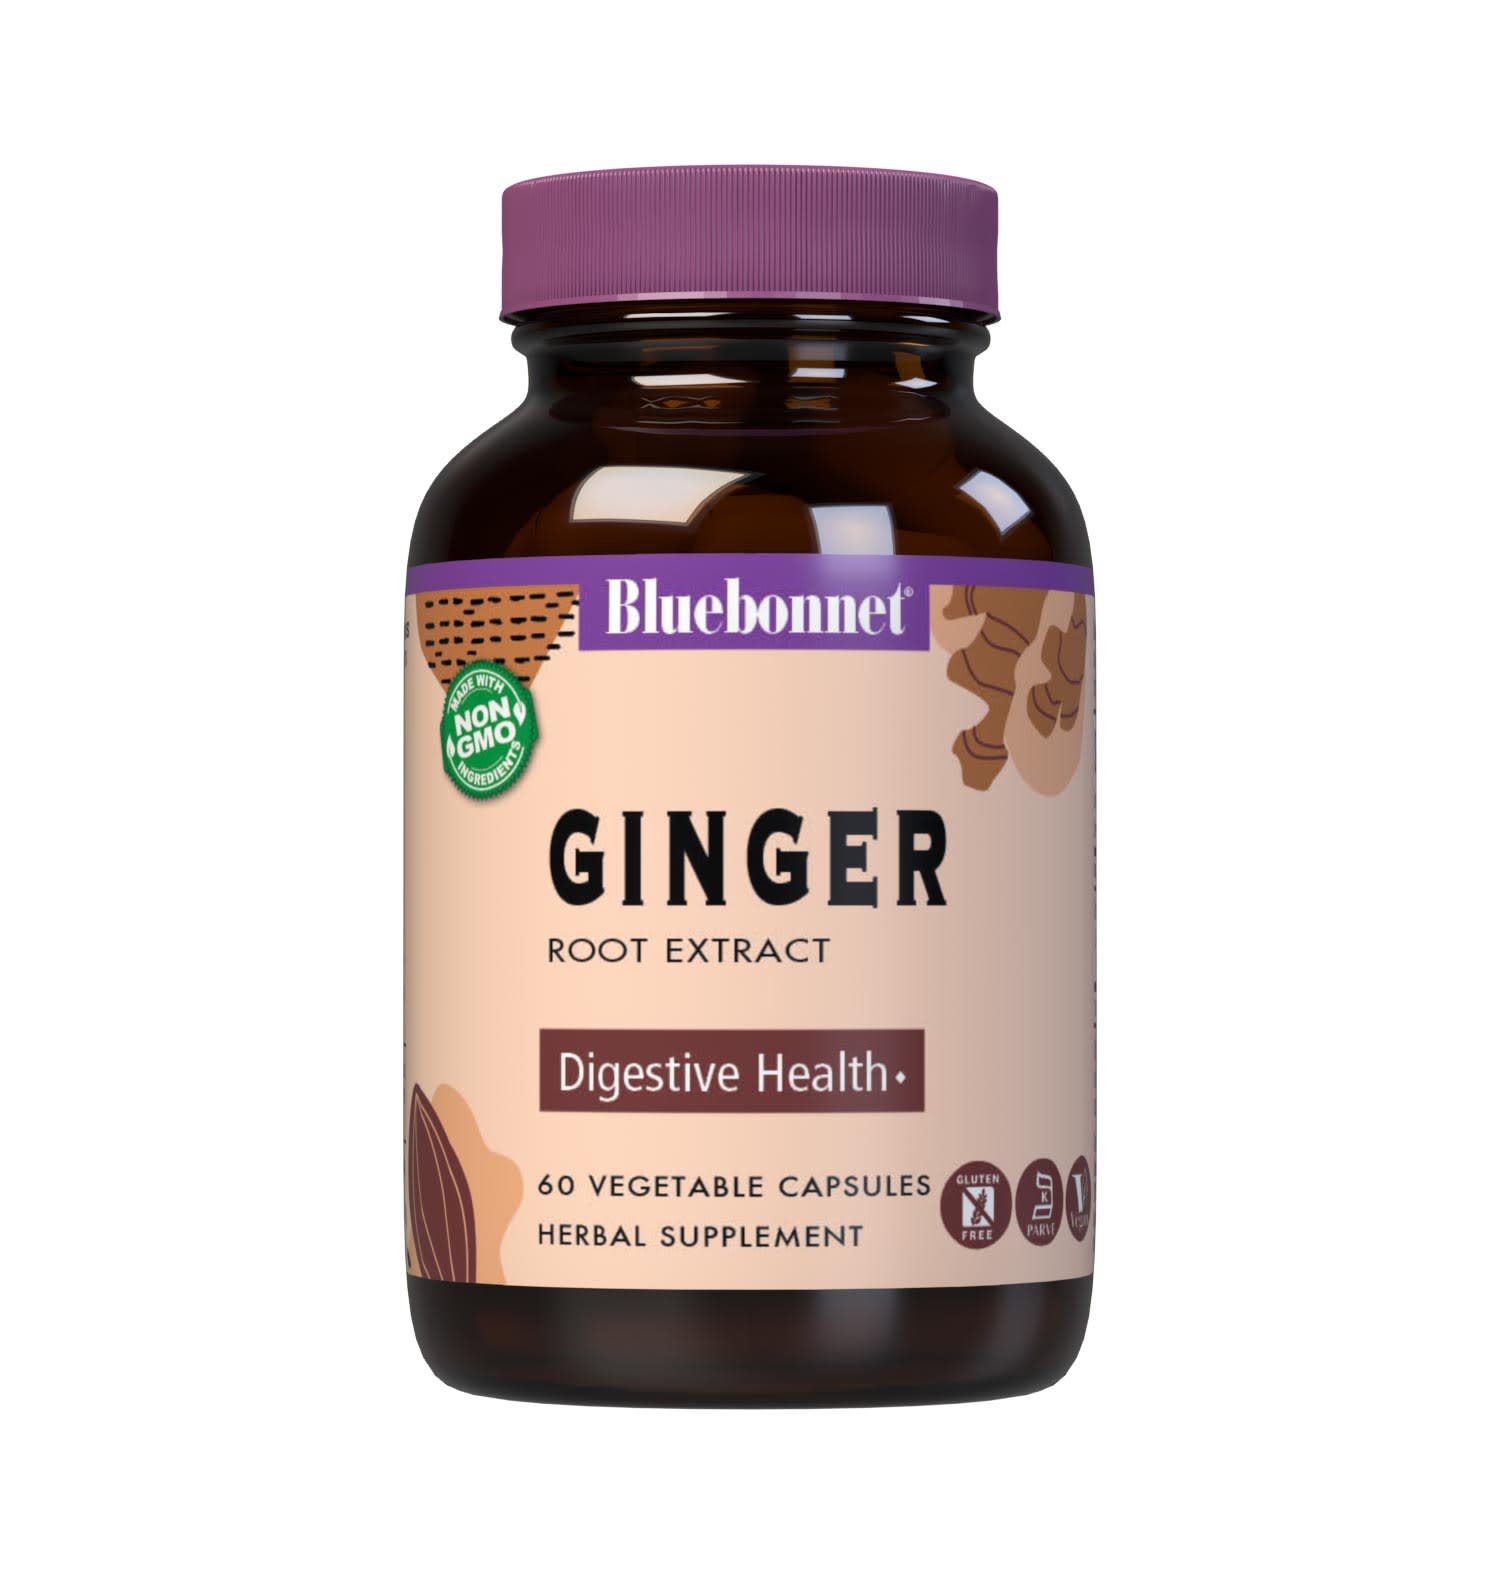 Bluebonnet’s Ginger Root Extract 60 Vegetable Capsules contain a standardized extract of gingerols and shogaols, the most researched active constituents found in ginger. A clean and gentle water-based extraction method is employed to capture and preserve ginger’s most valuable components. #size_60 count